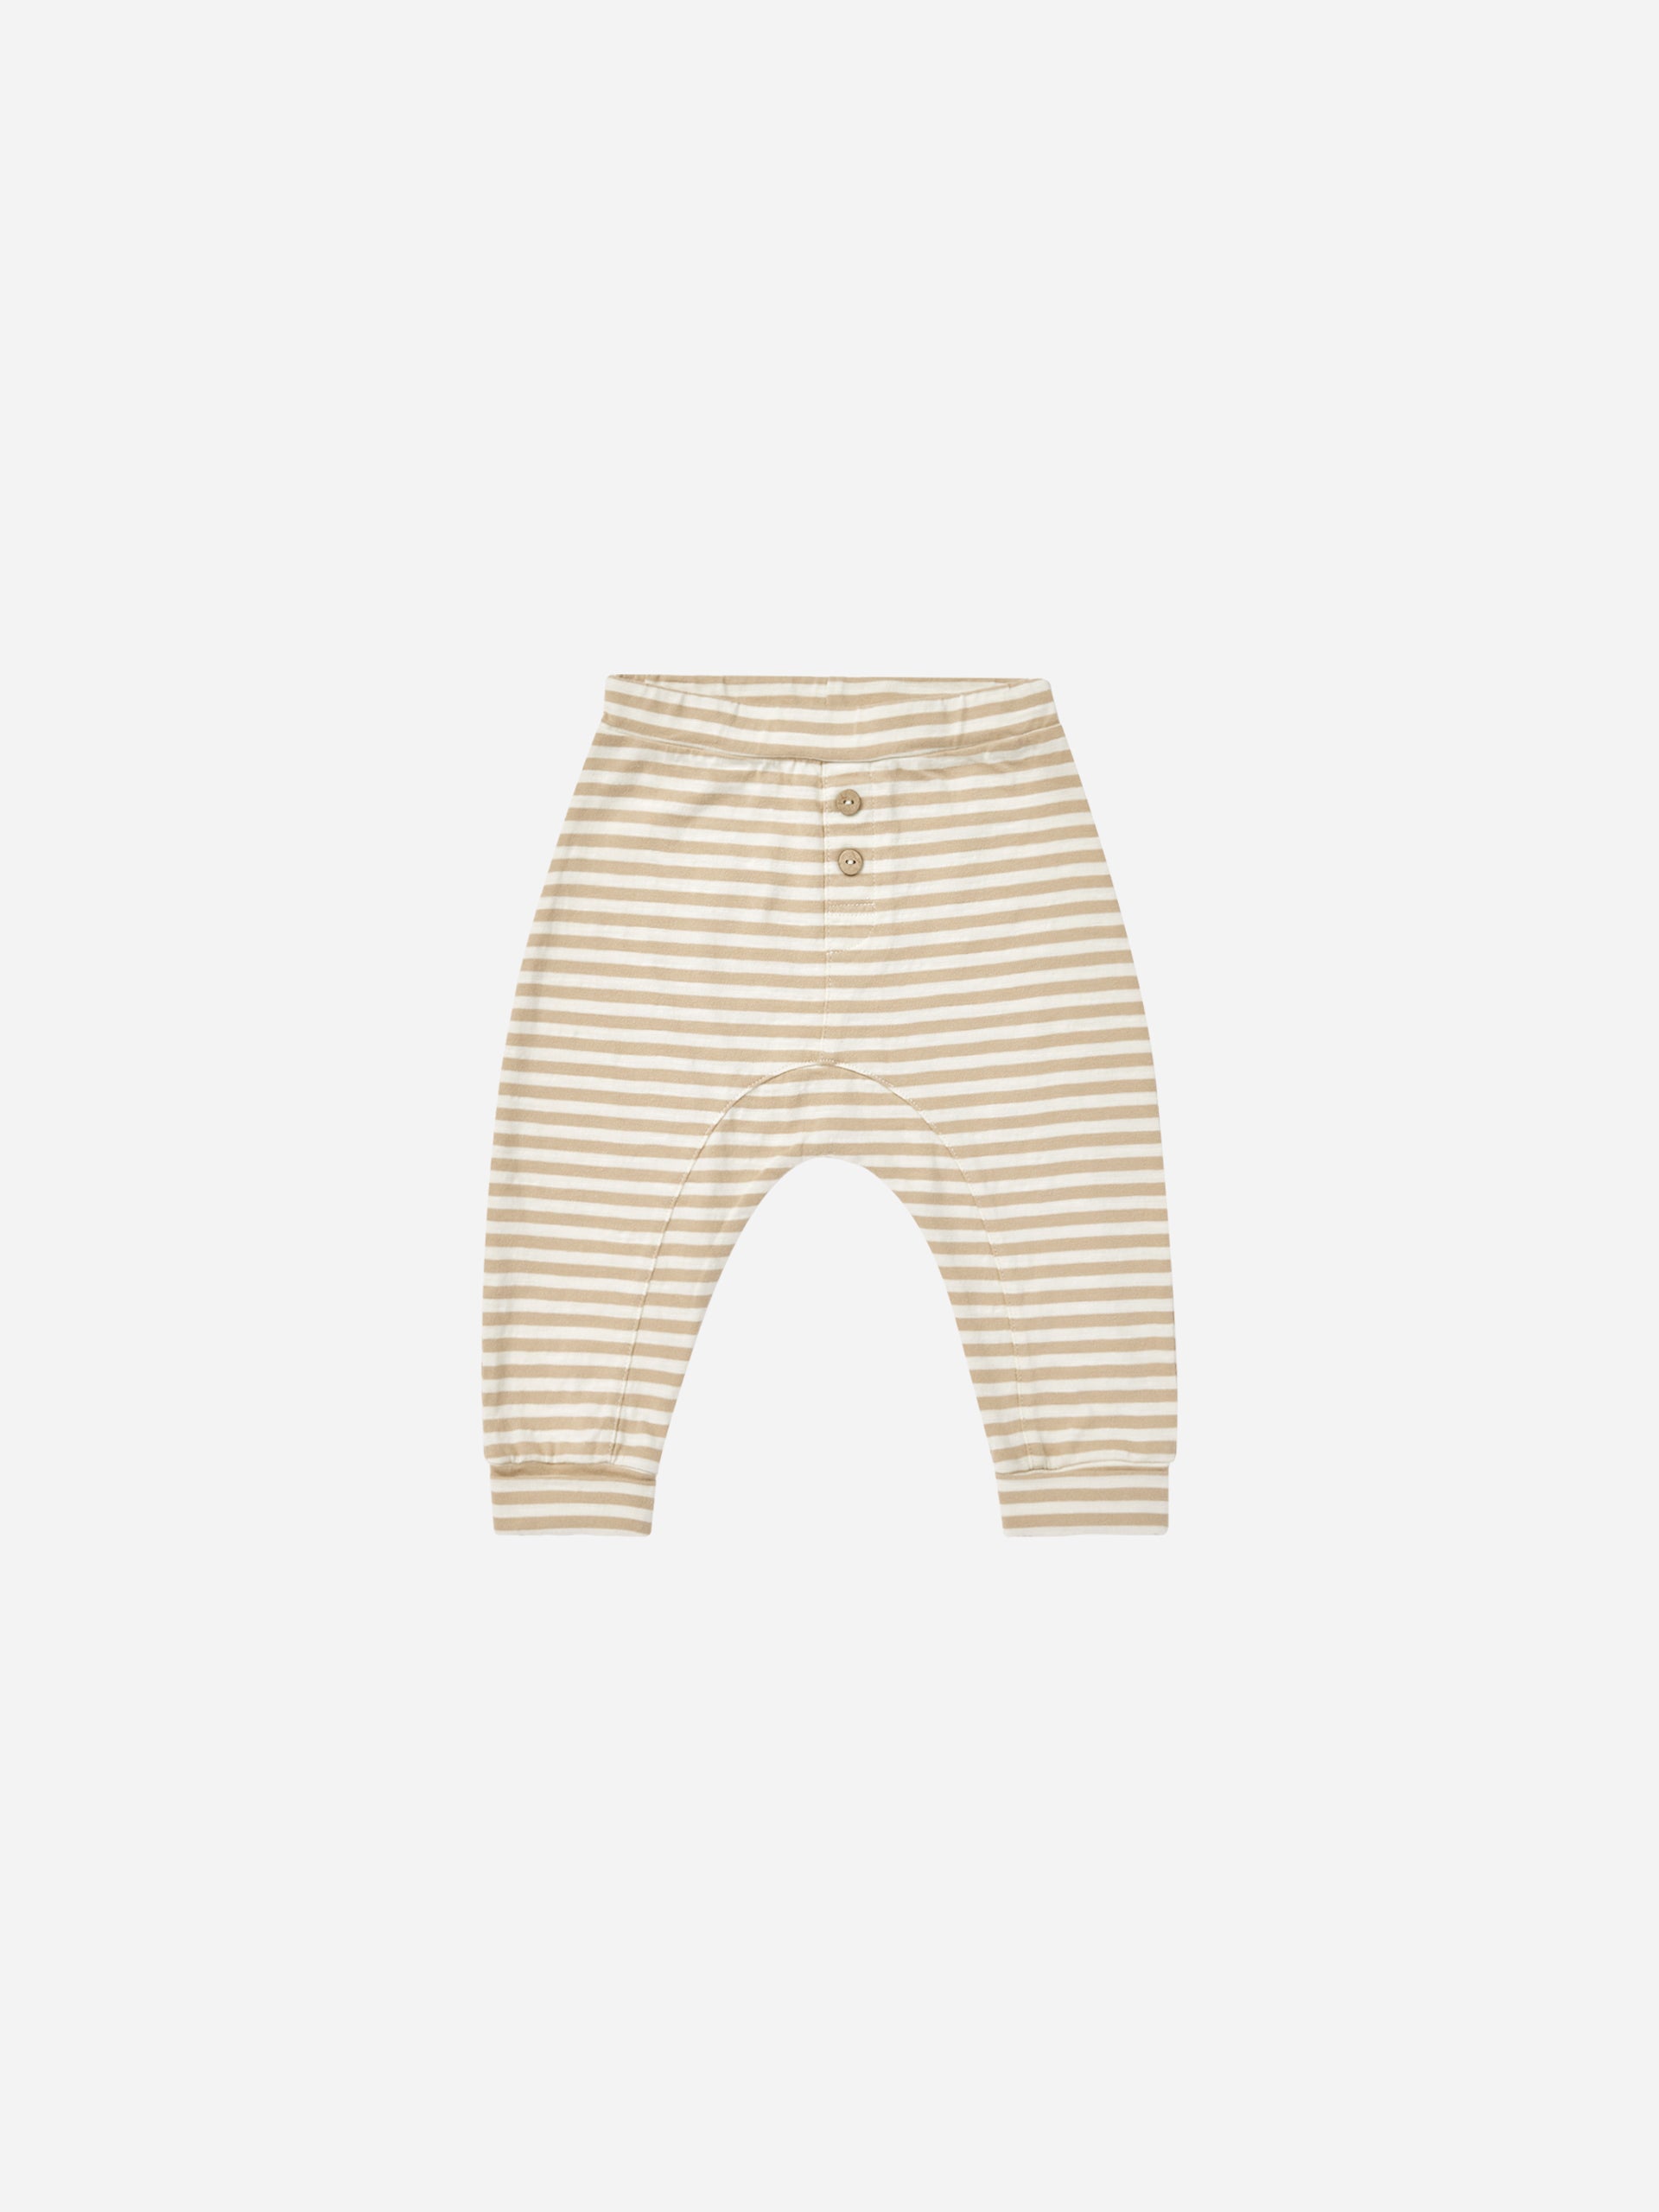 Baby Cru Pant || Sand Stripe - Rylee + Cru | Kids Clothes | Trendy Baby Clothes | Modern Infant Outfits |